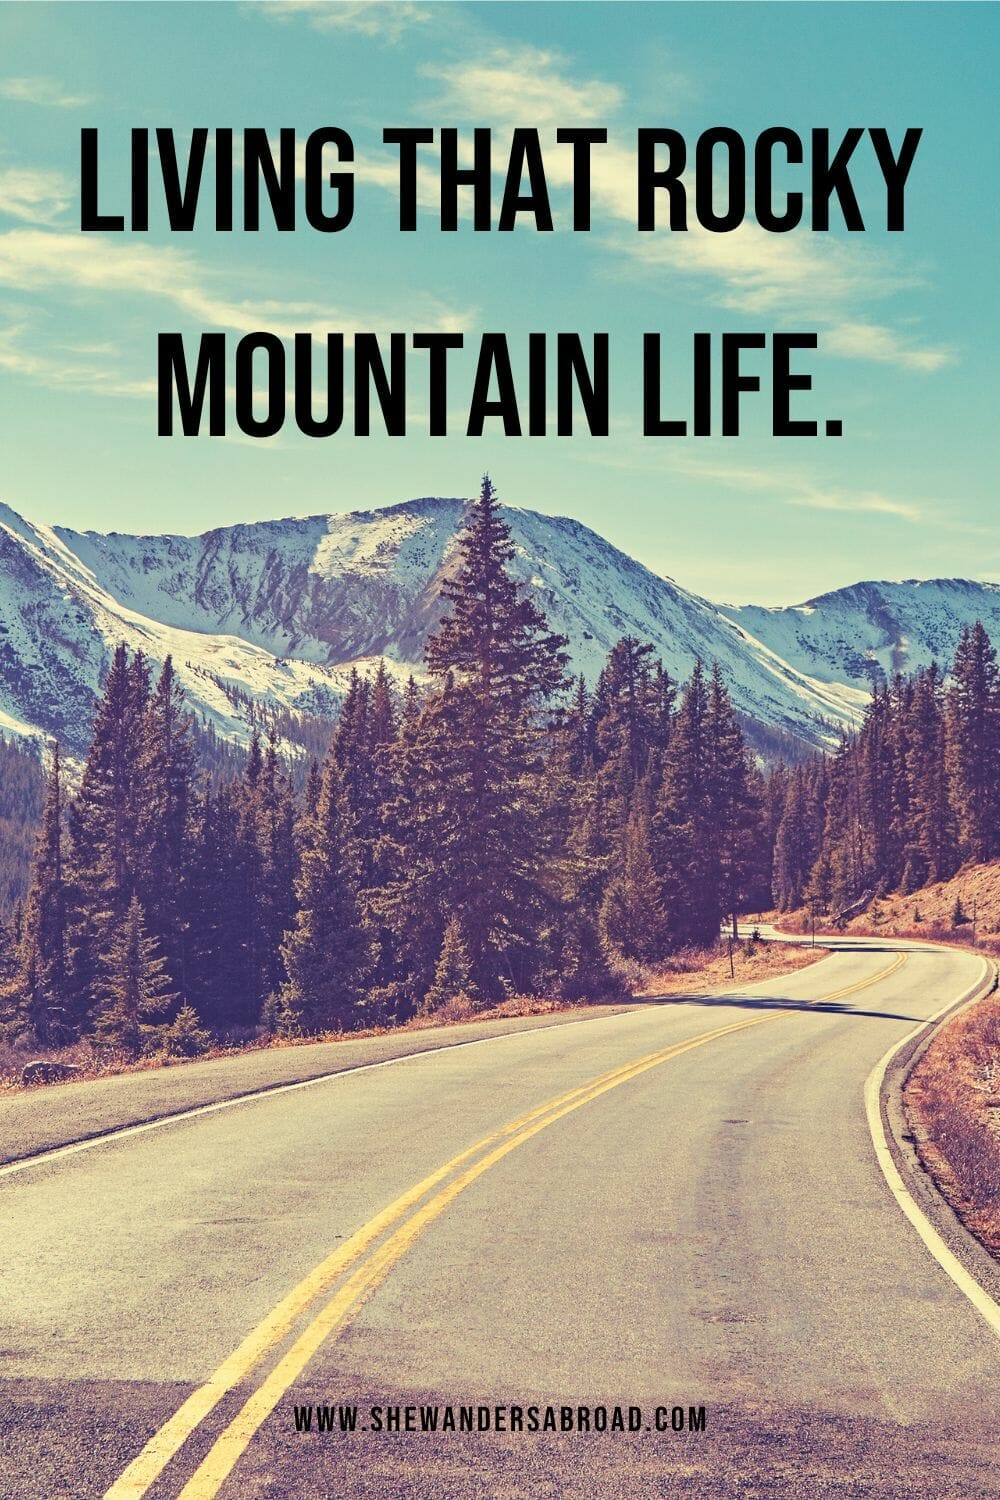 Inspirational Rocky Mountain Quotes and Captions